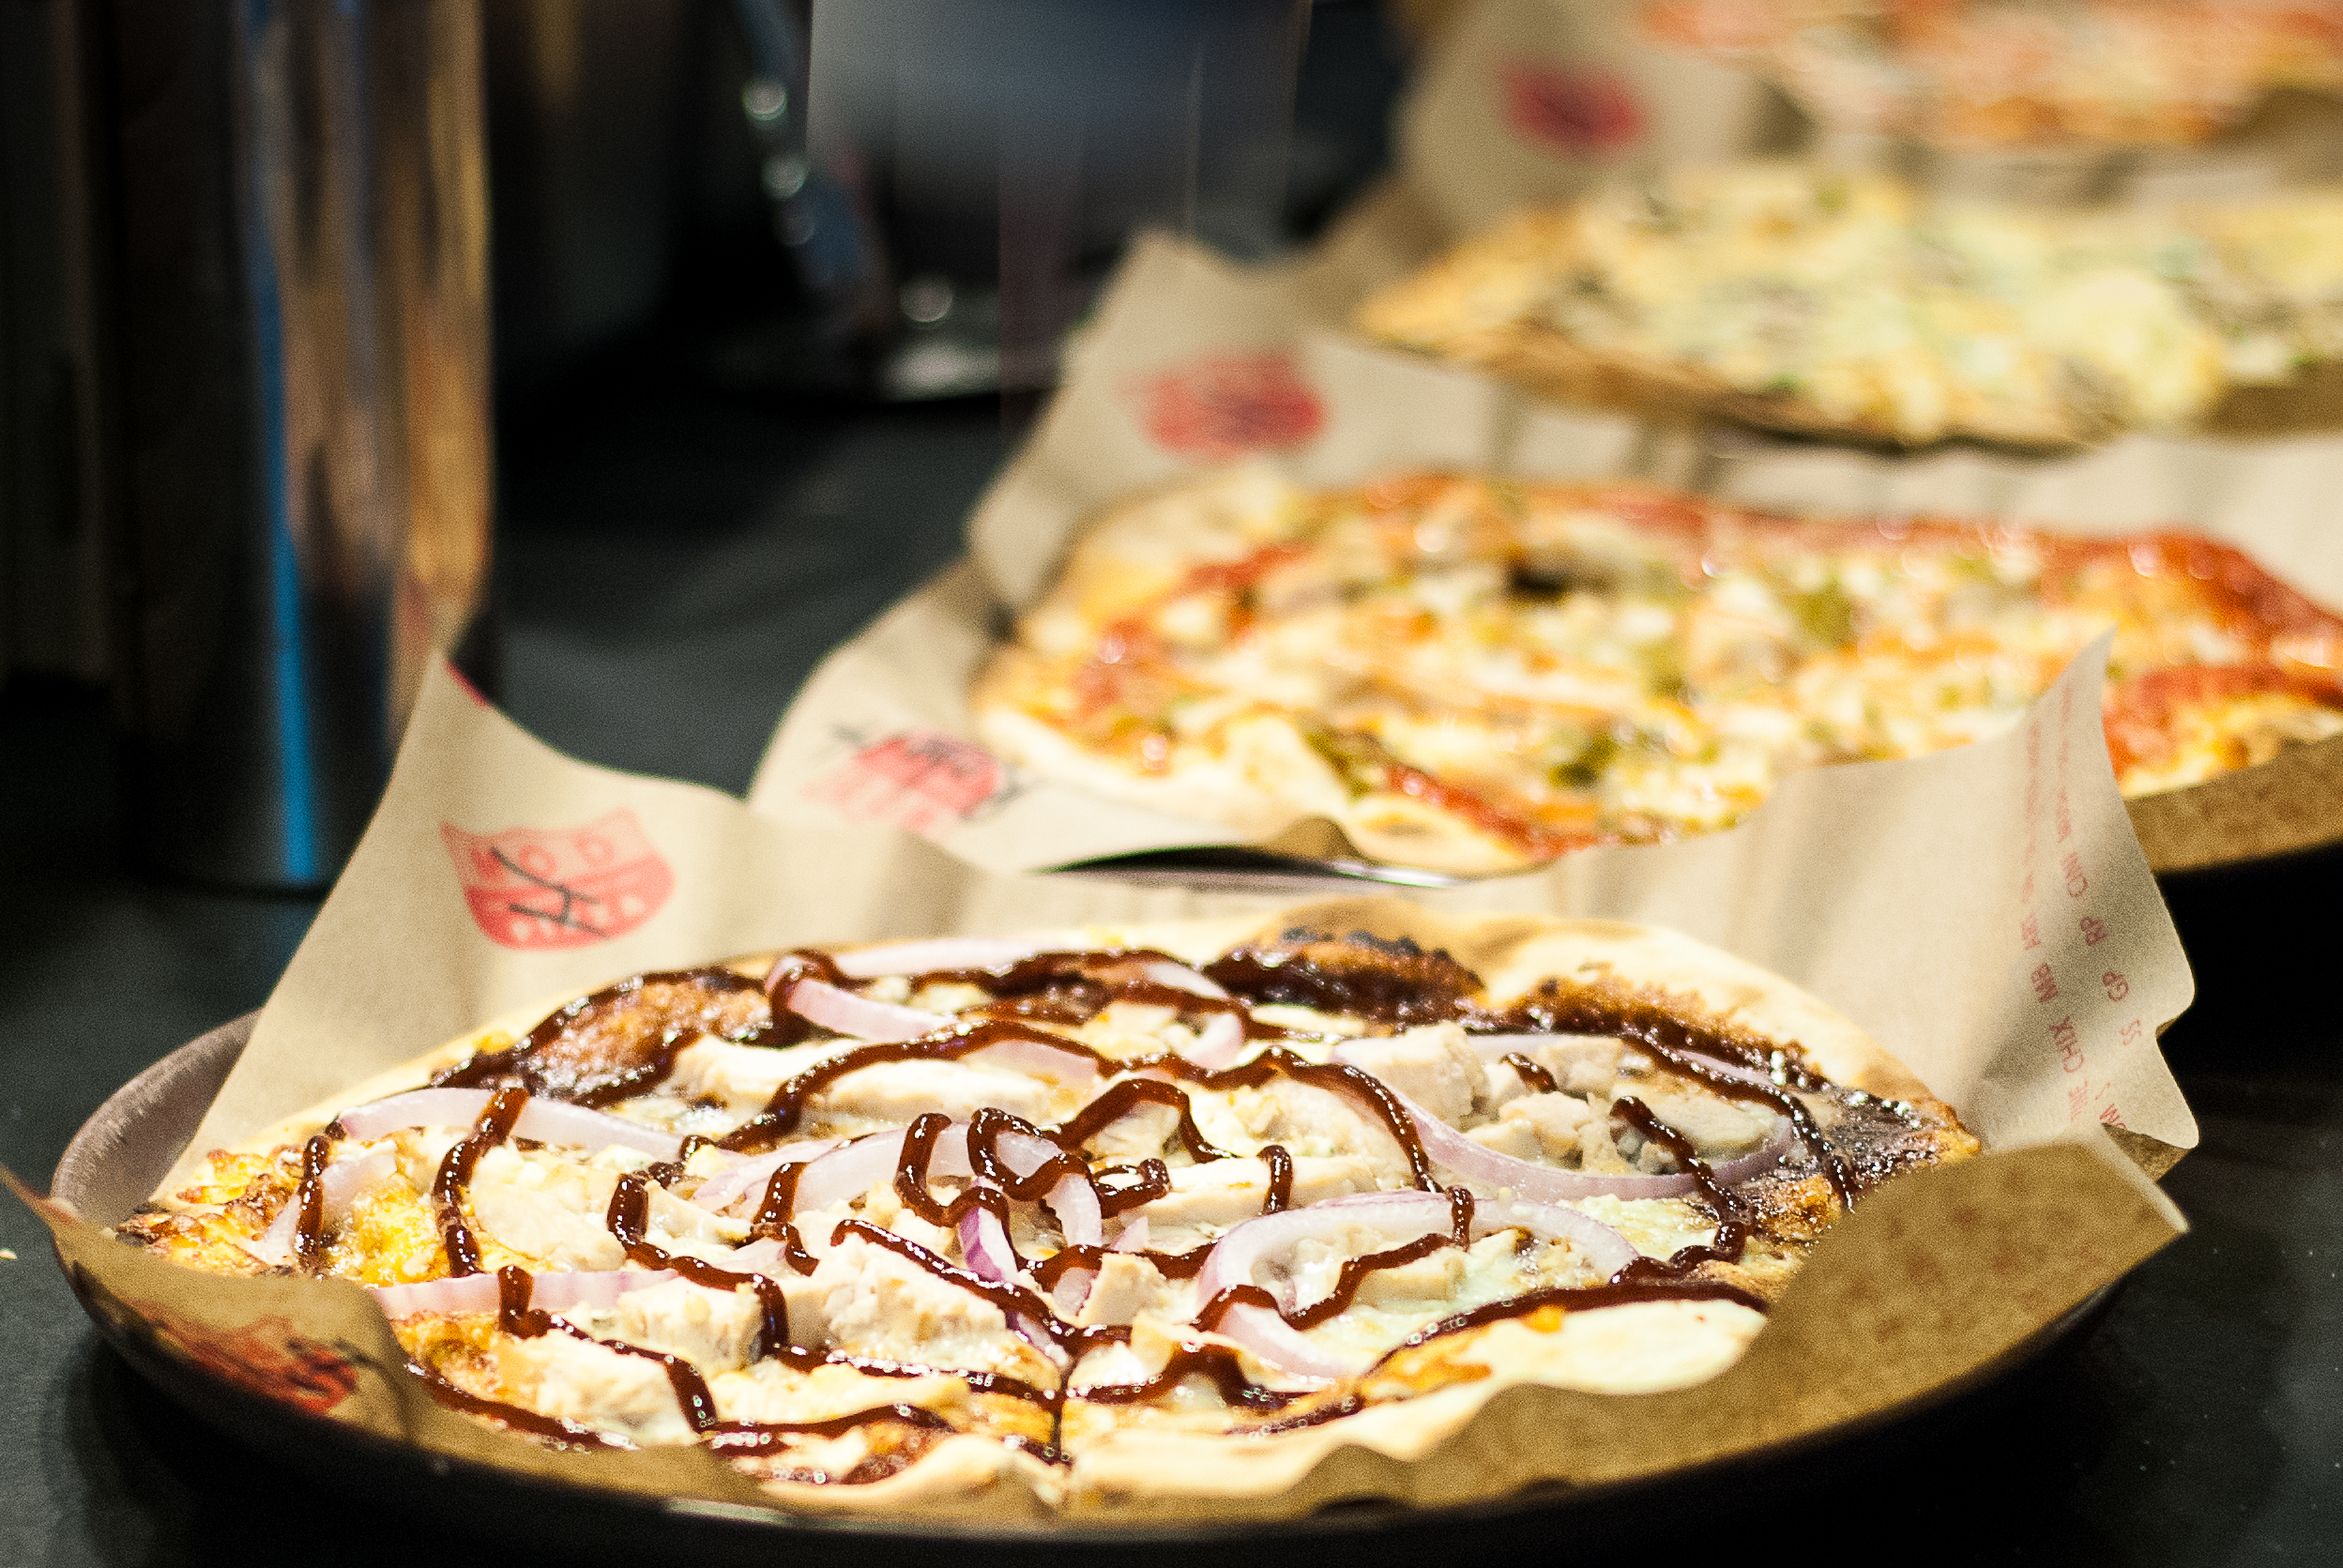 MOD Pizza on the App Store